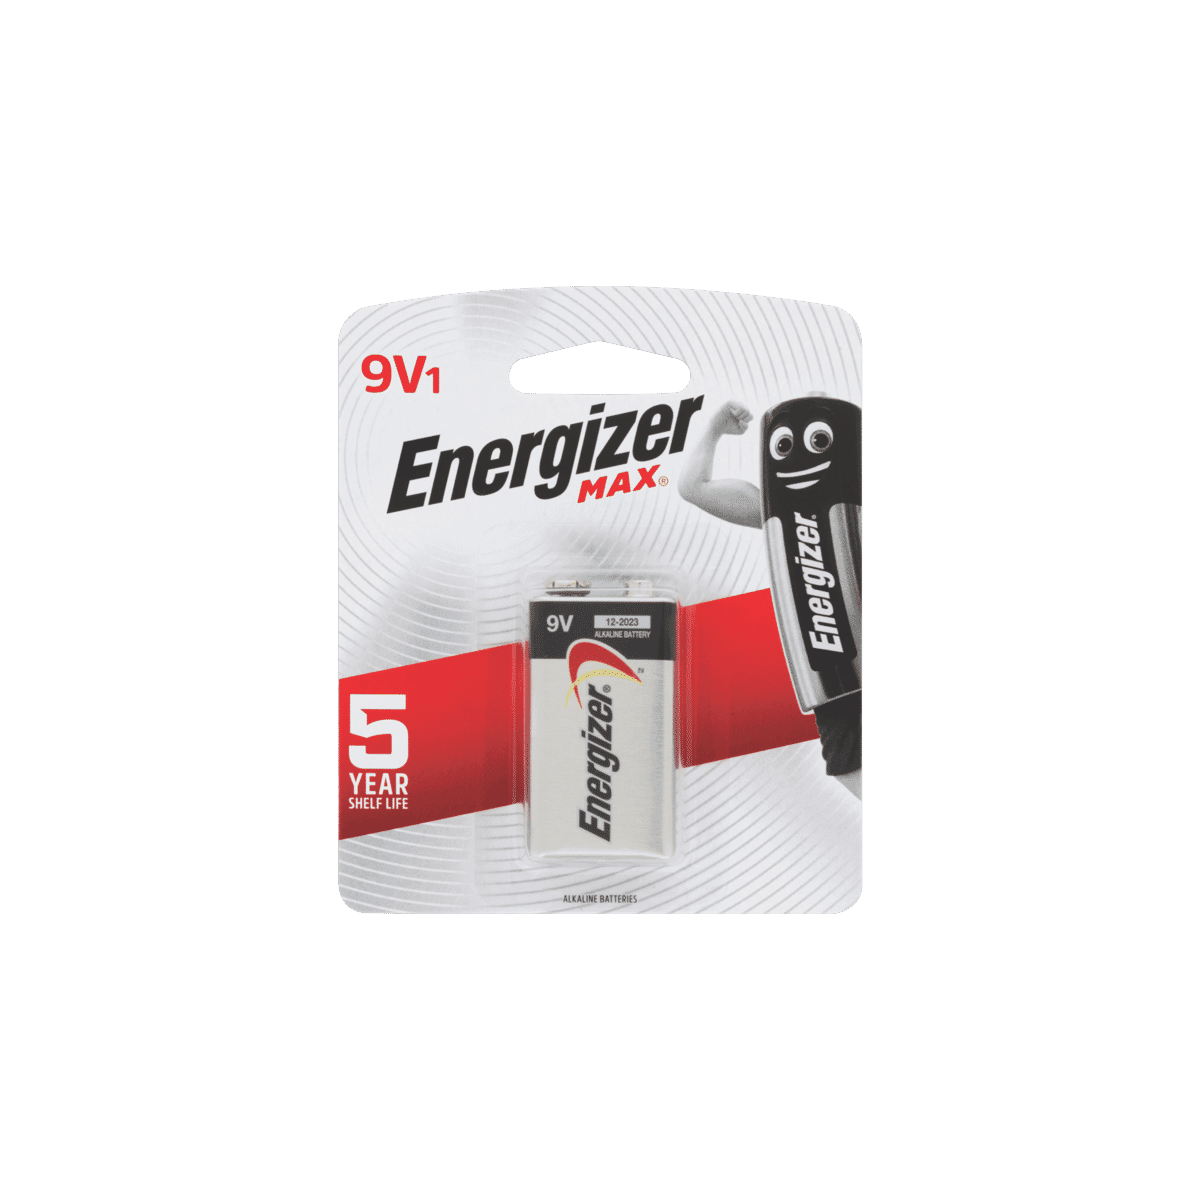 Ampère lexicon extract Energizer E000035000 Max 9V 1Pk Battery at The Good Guys